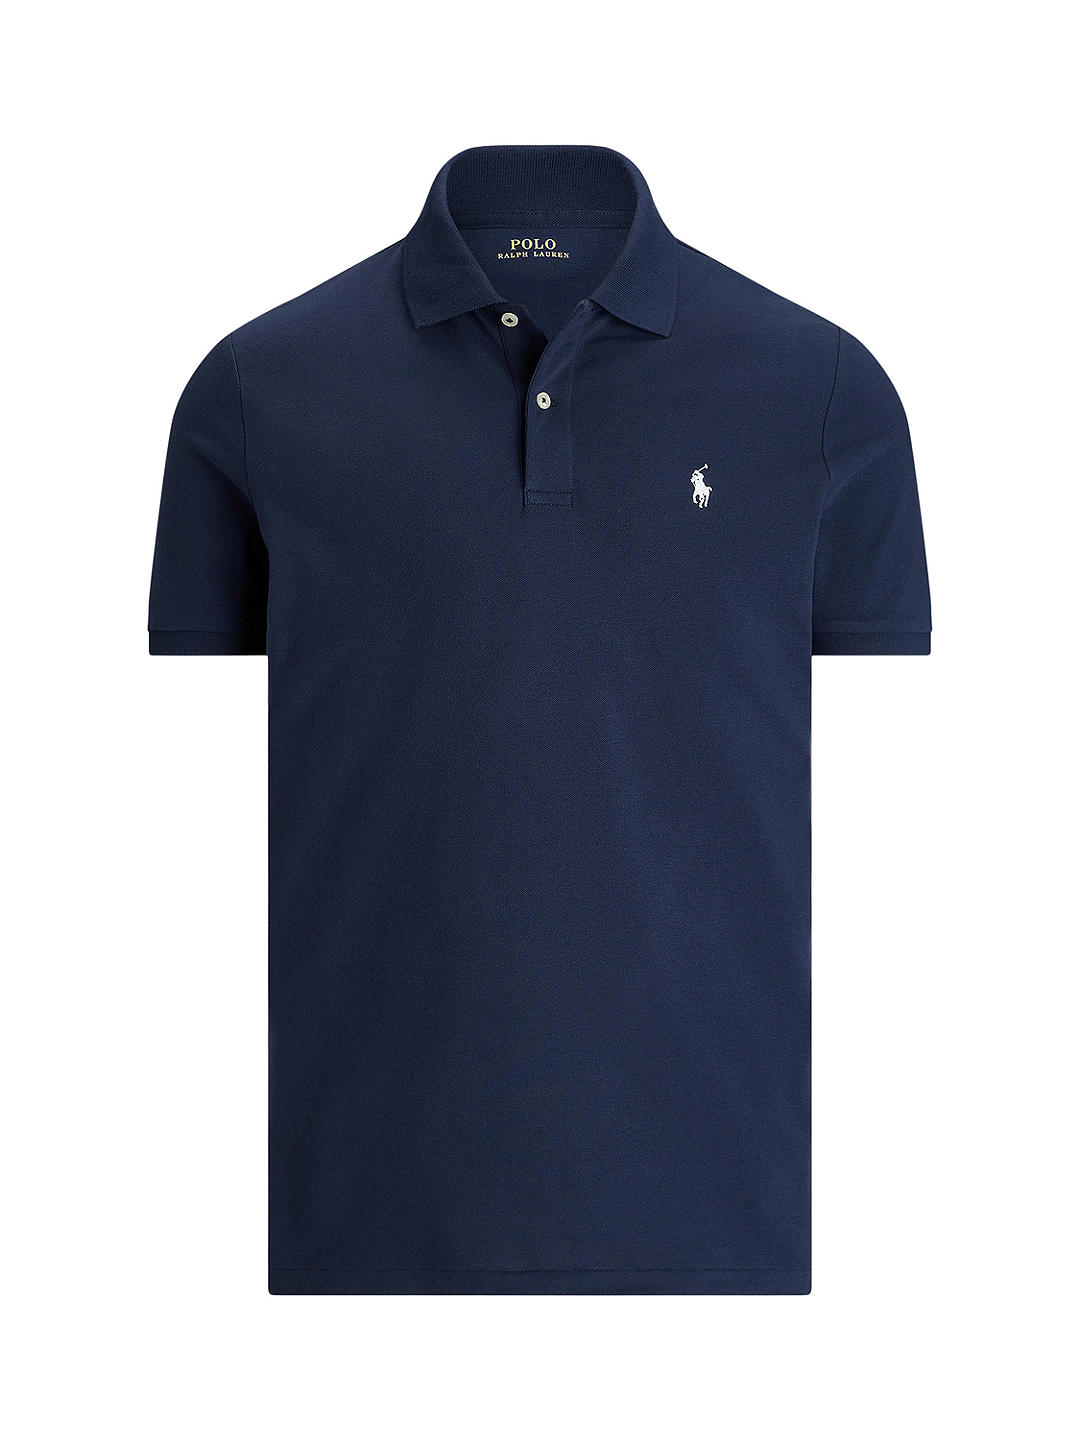 Polo Golf Ralph Lauren Tailored Fit Performance Mesh Polo Shirt, Refined Navy